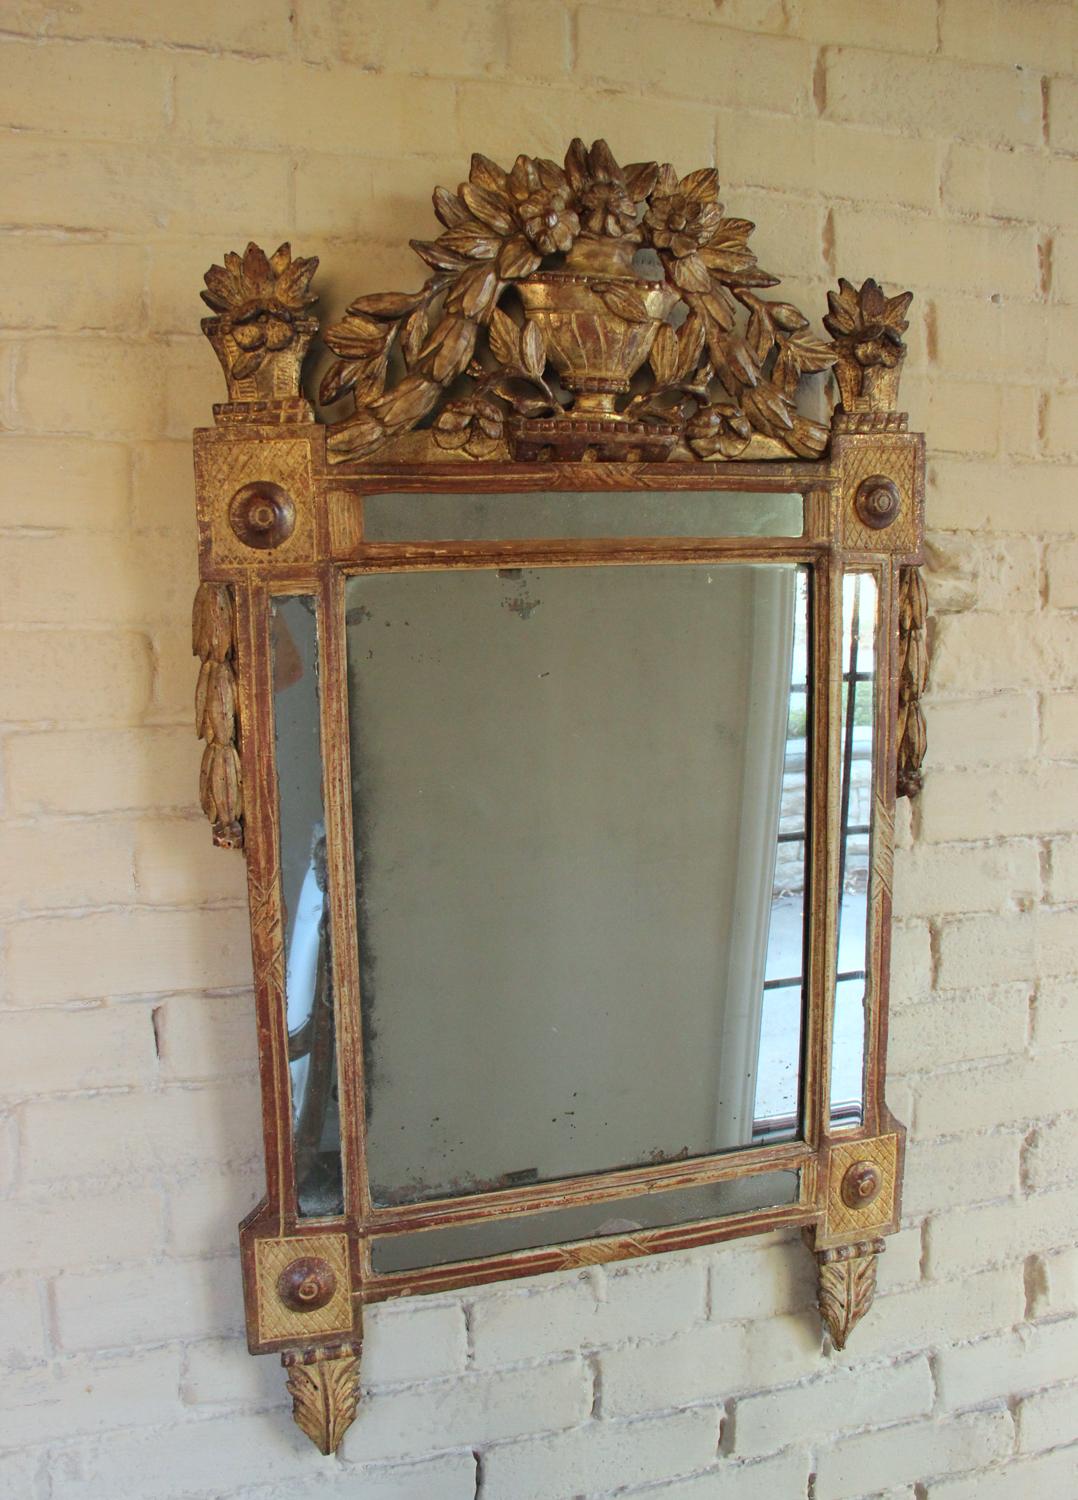 A beautifully carved French original giltwood mirror from the Louis XVI, 'Louis Seize', period with urn pediment and floral motif. Original mercury mirror plate. The carved crest features an urn filled with a bouquet of trailing flowers. The floral